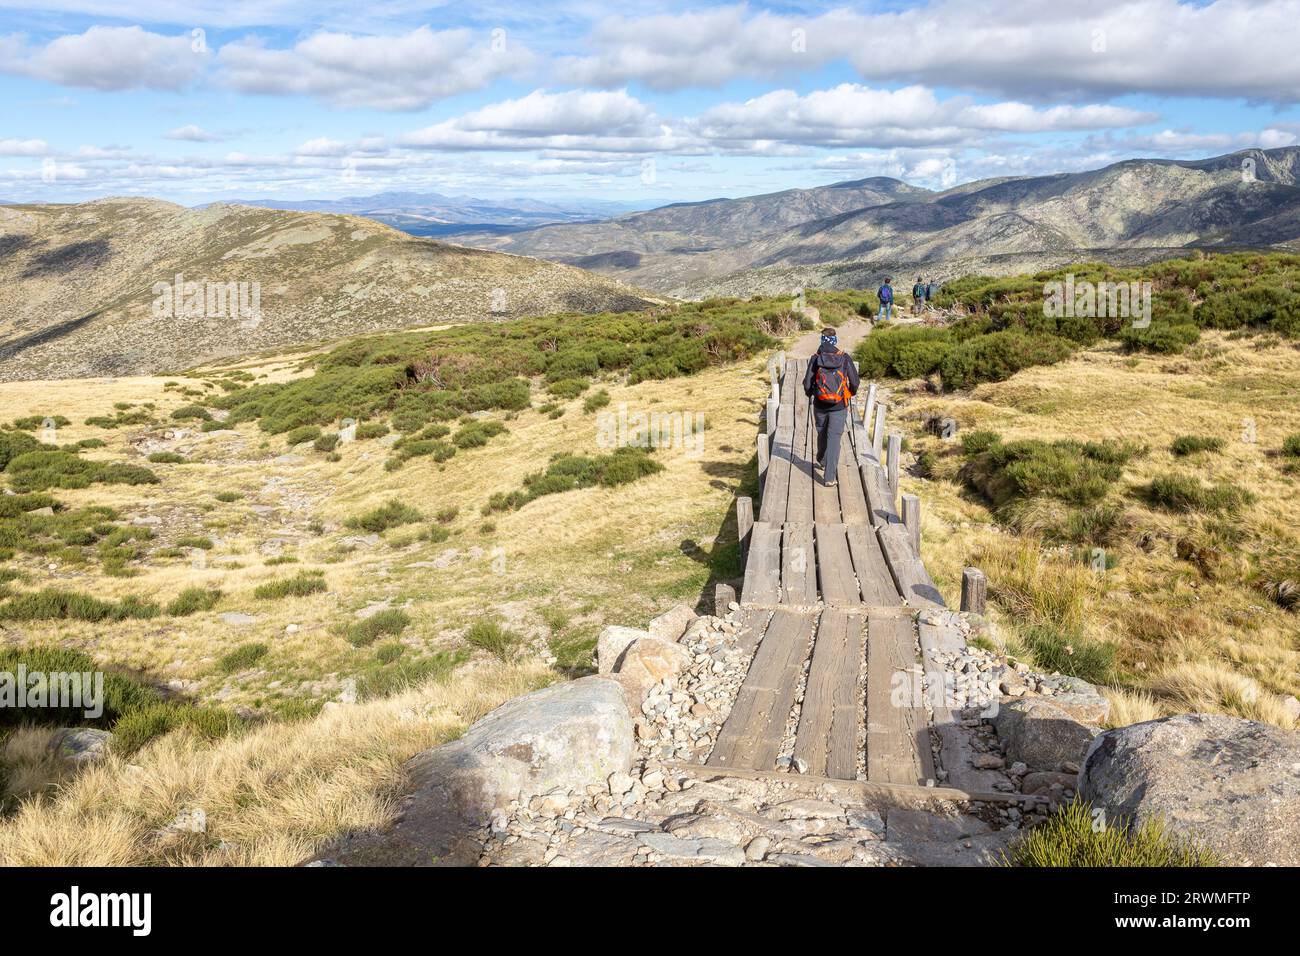 Tourists hiking on wooden trail to the Laguna Grande de Gredos lake from the Plataforma de Gredos in Sierra de Gredos mountains, dry brown grass. Stock Photo